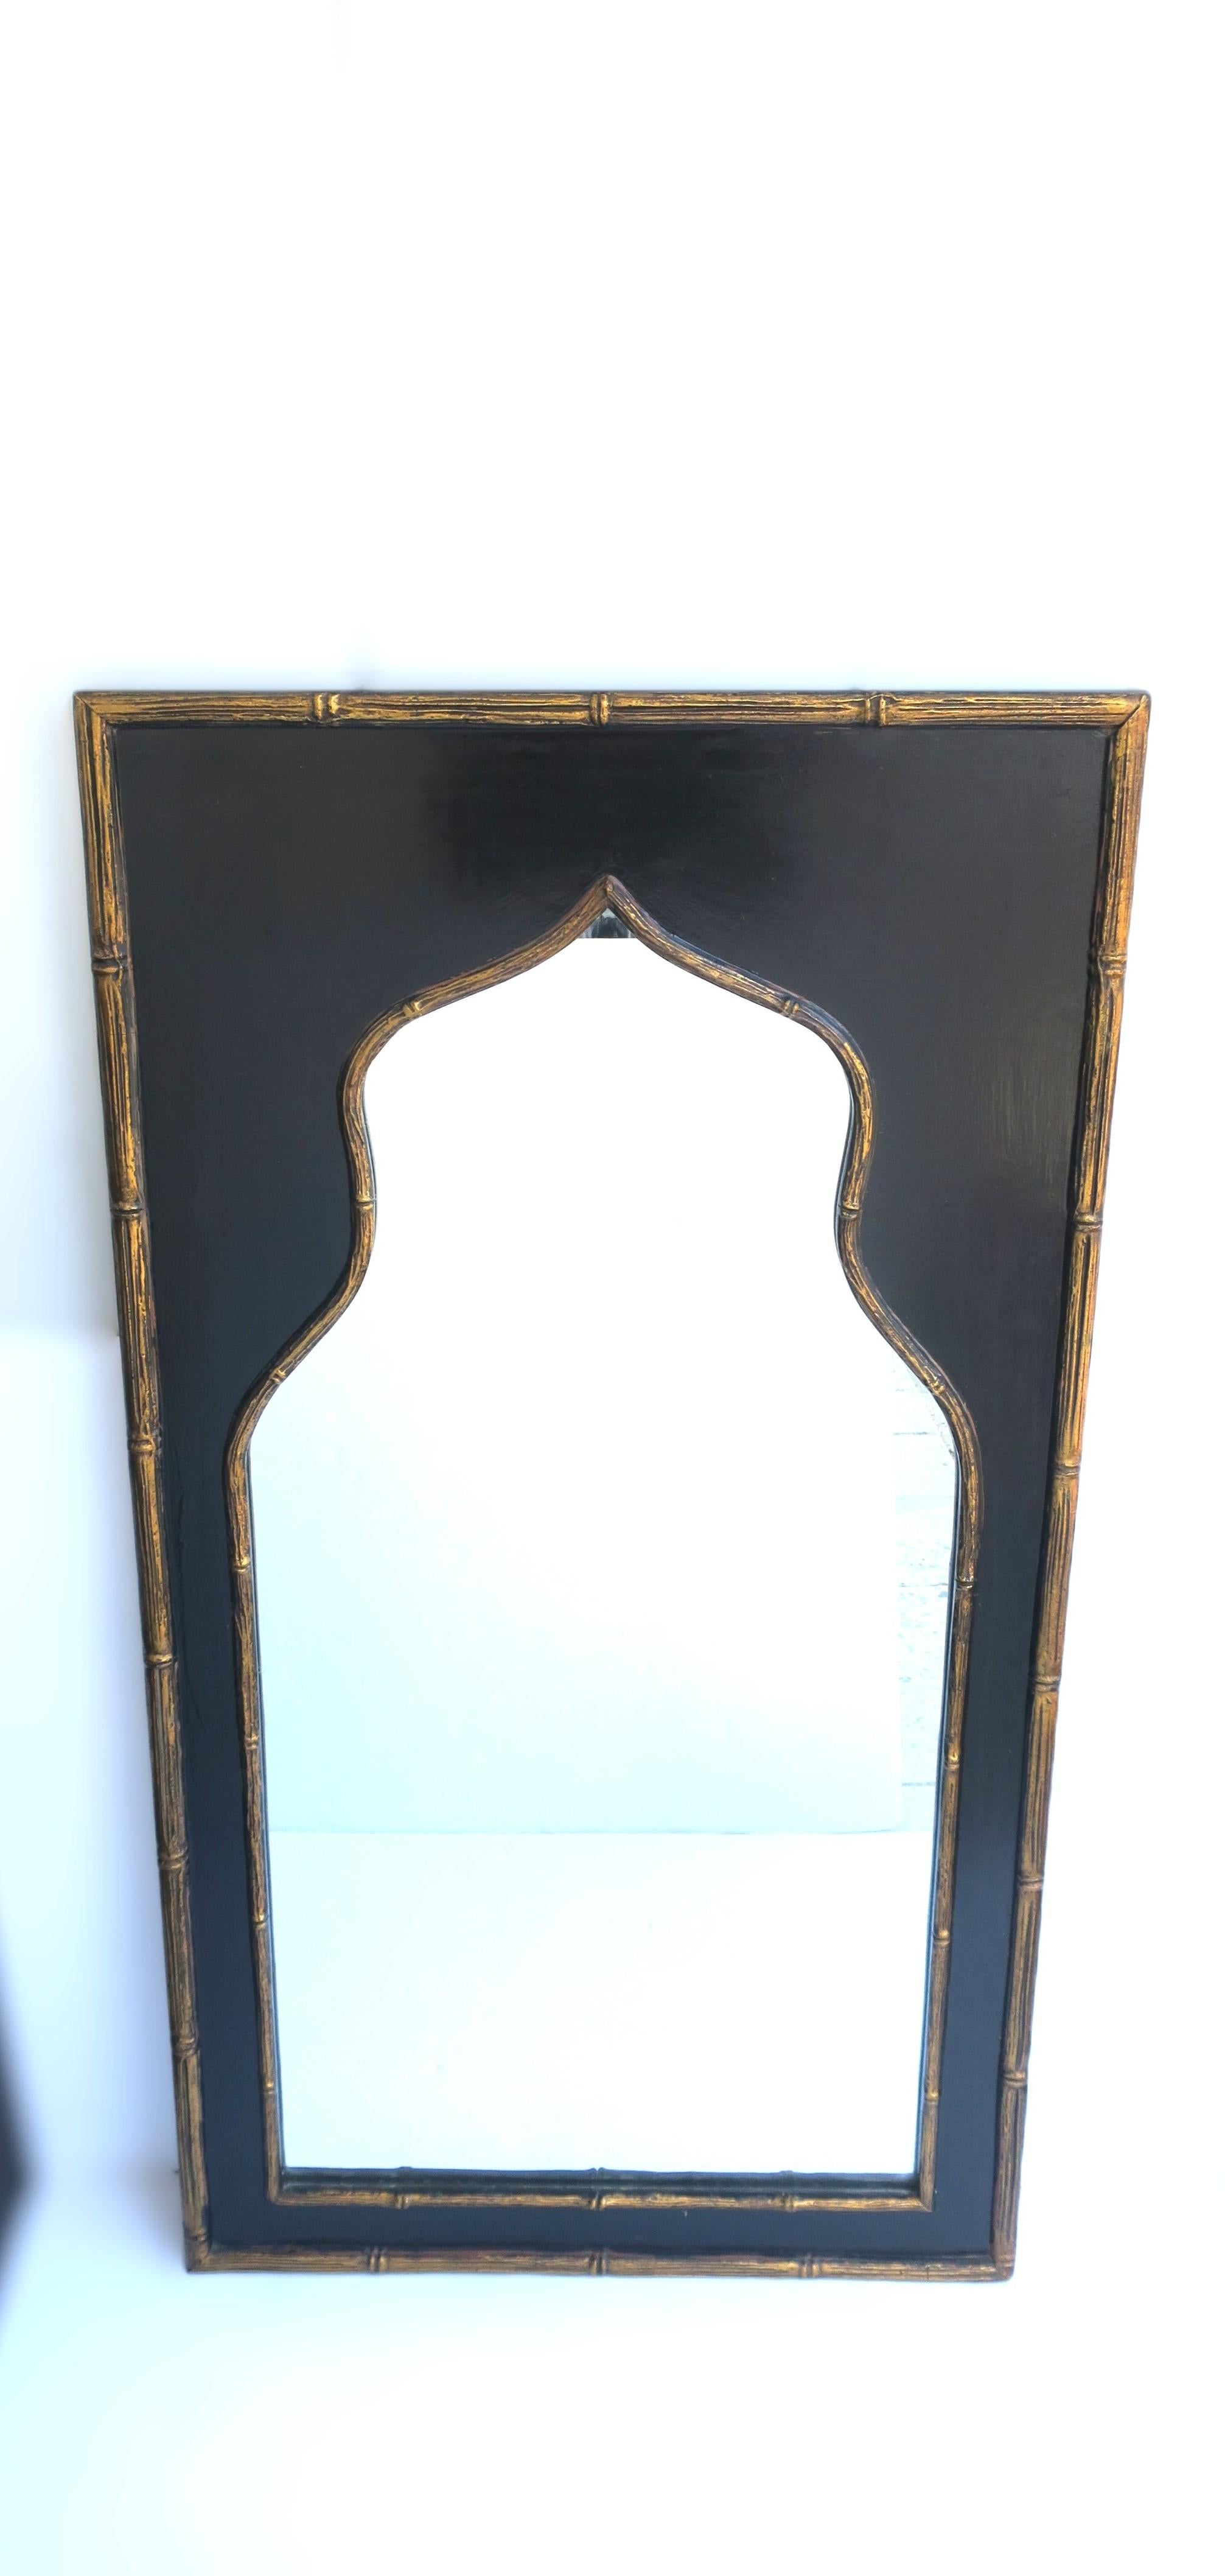 A beautiful black and gold gilt wall mirror with faux bamboo detail, in the Moorish design style, circa early mid-20th century, 1940s, USA. Mirror is rectangular with gold gilt faux-bamboo edge around black lacquer ground/in-between a gold gilt